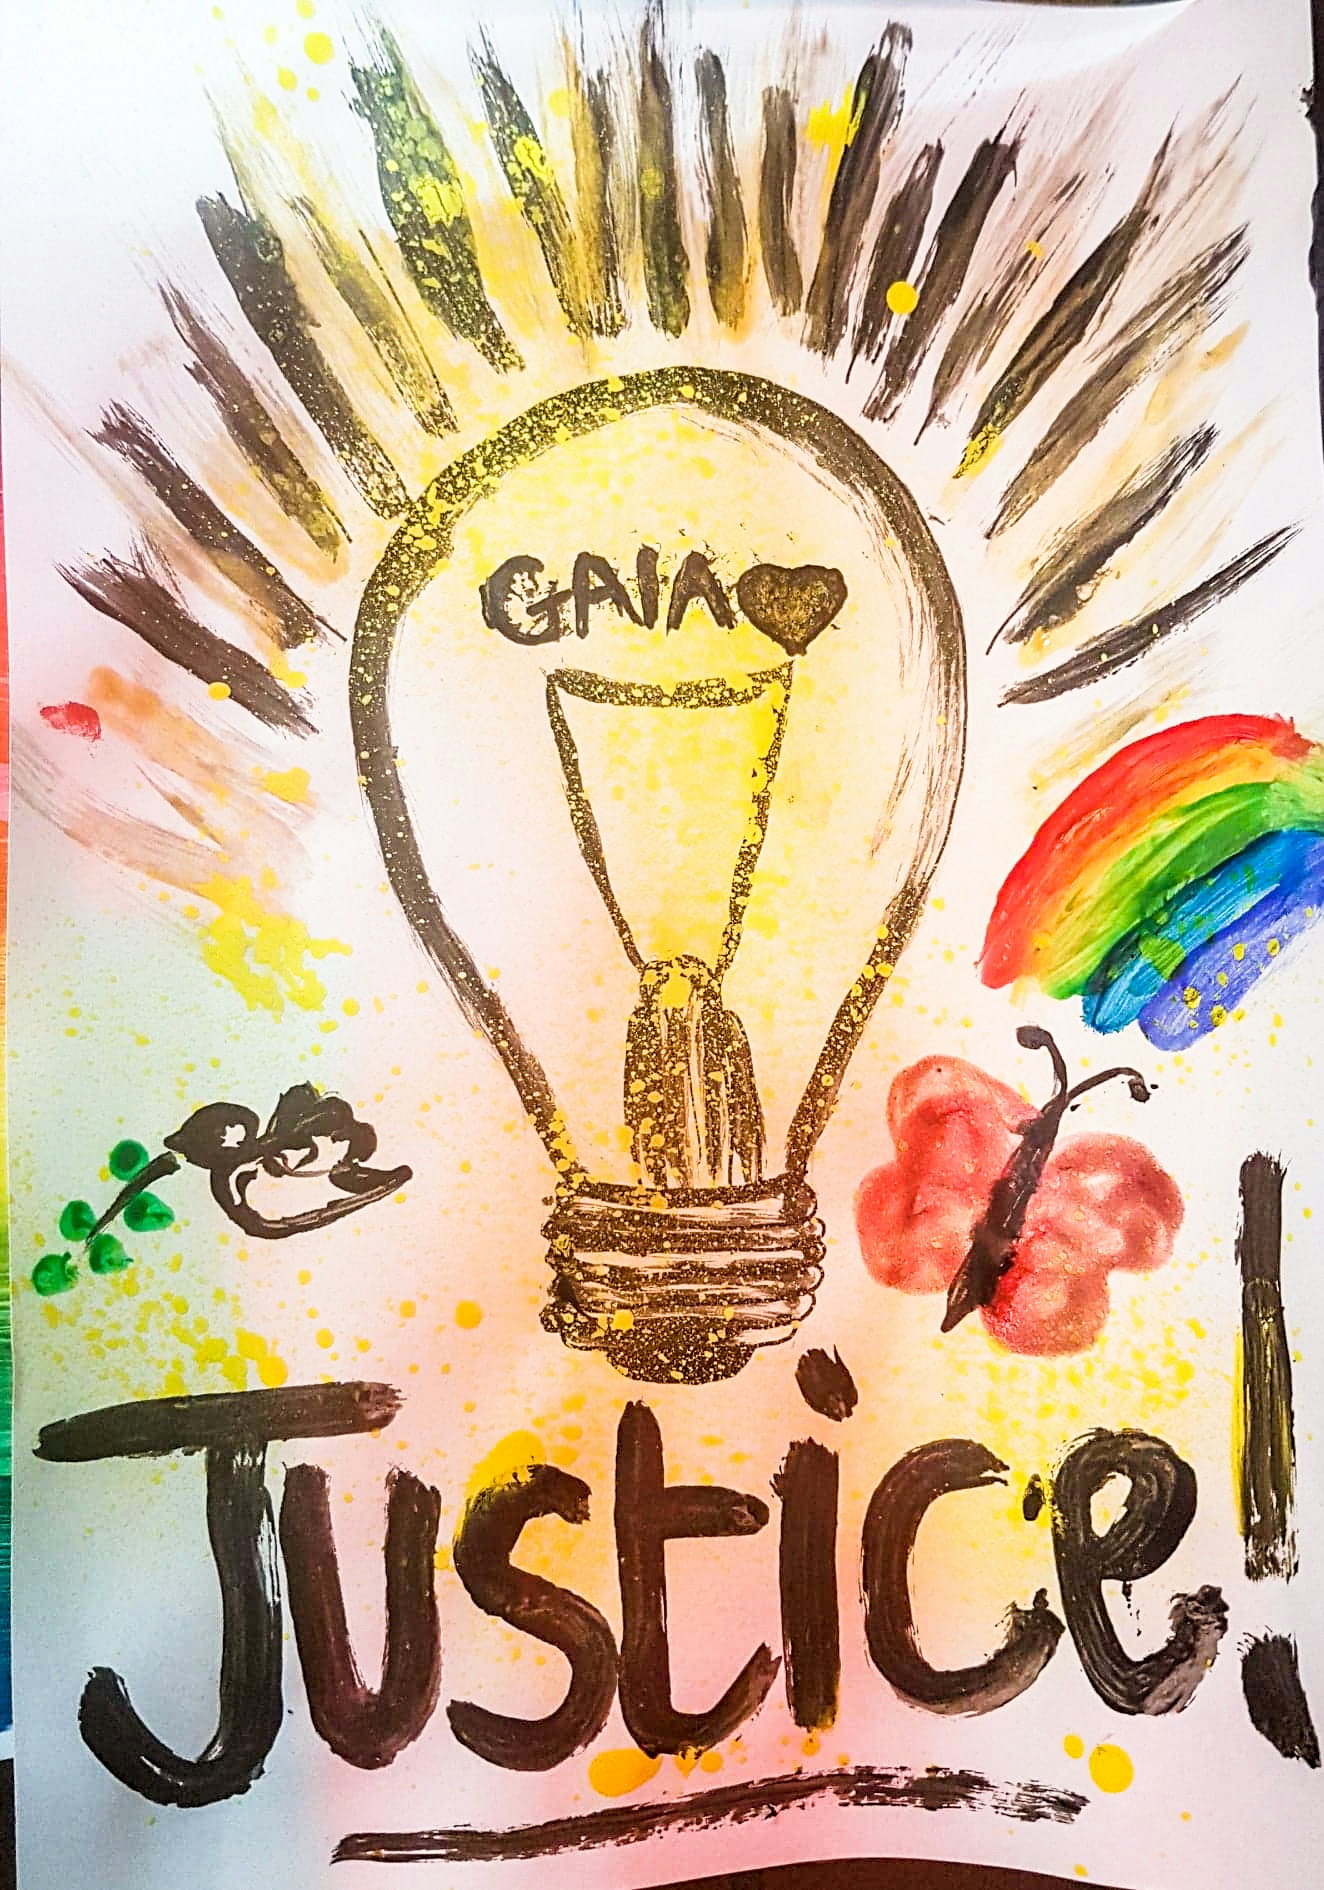 Photograph of an artwork depicting a light bulb withe the name Gaia inside, and the word ‘justice’ beneath. The light bulb is surrounded by a rainbow, a butterfly and a dove.